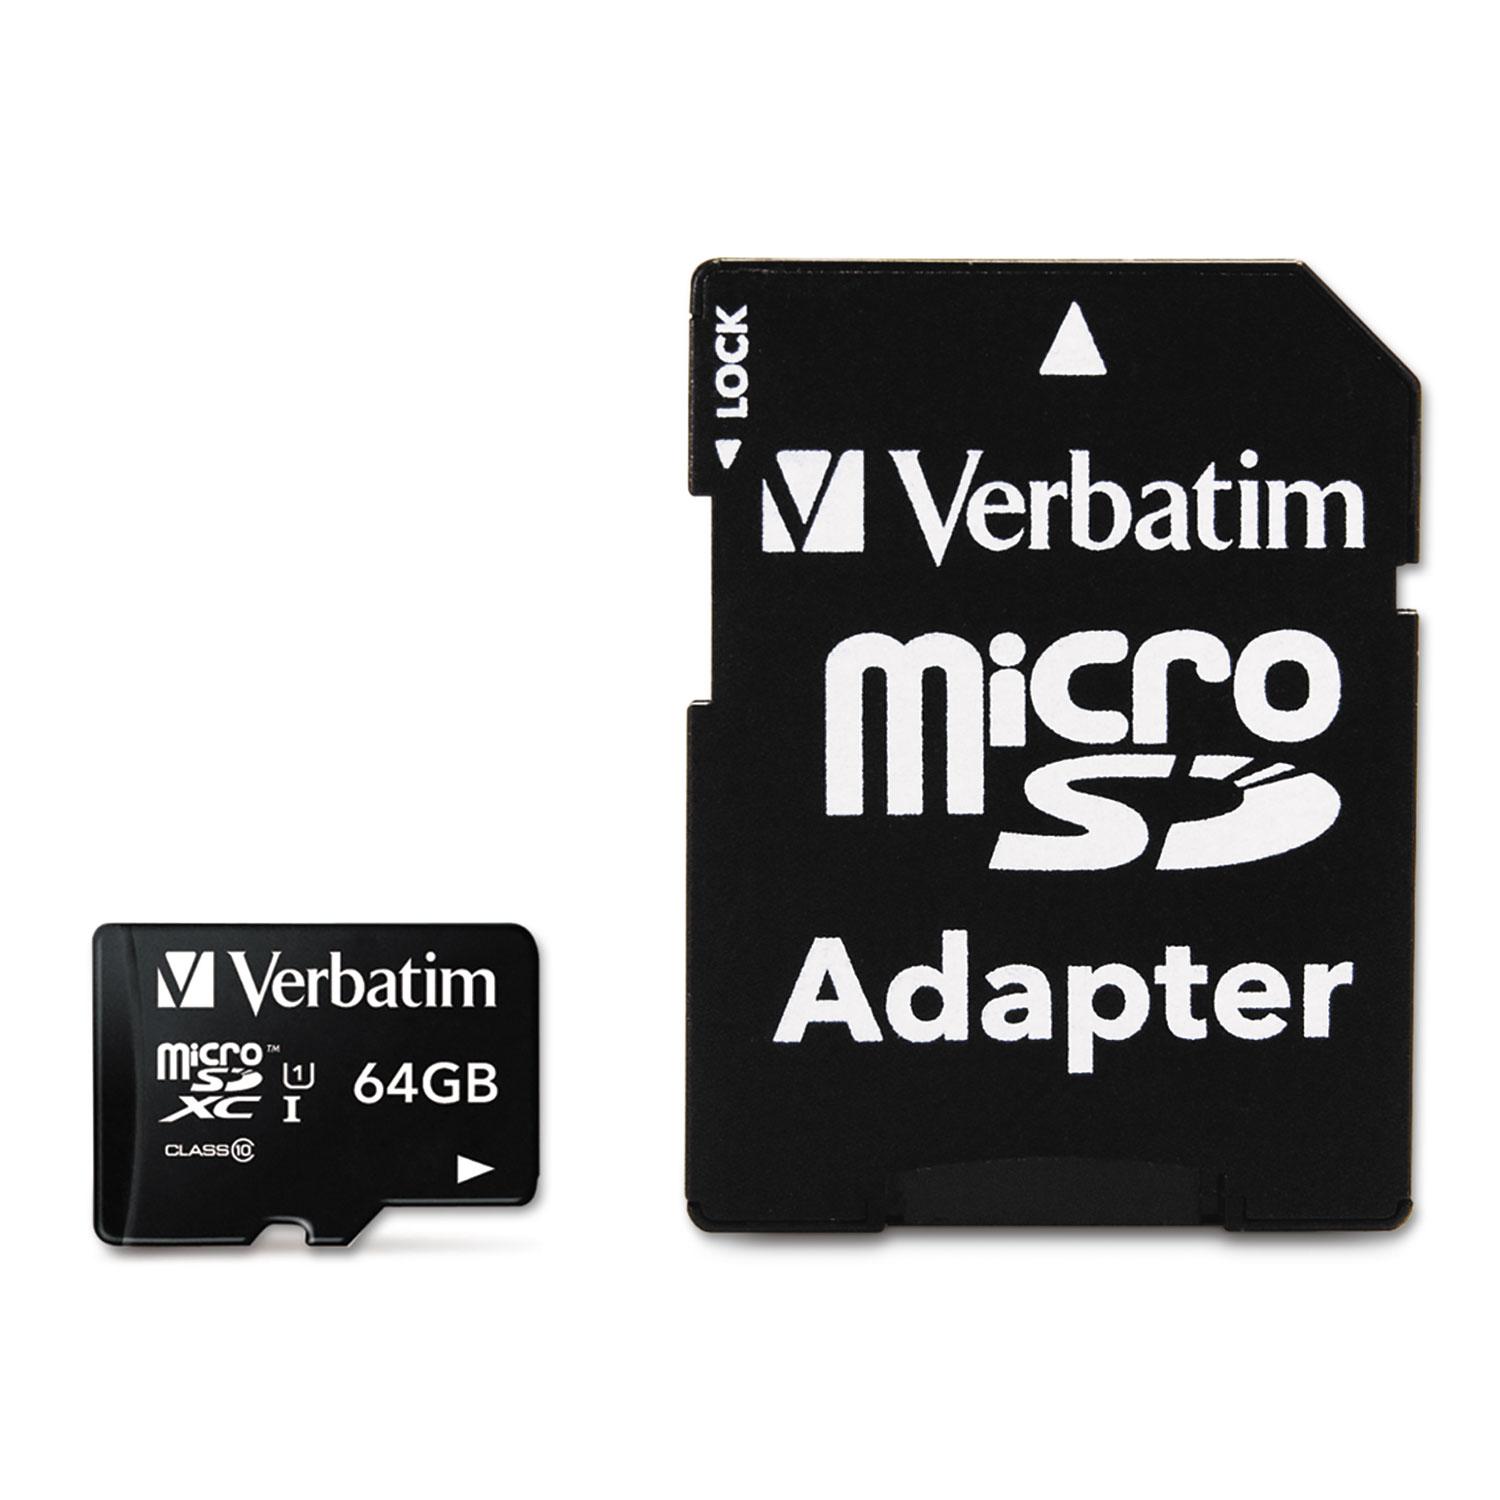 microSDXC Memory Card with SD Adapter, Class 10, 64GB